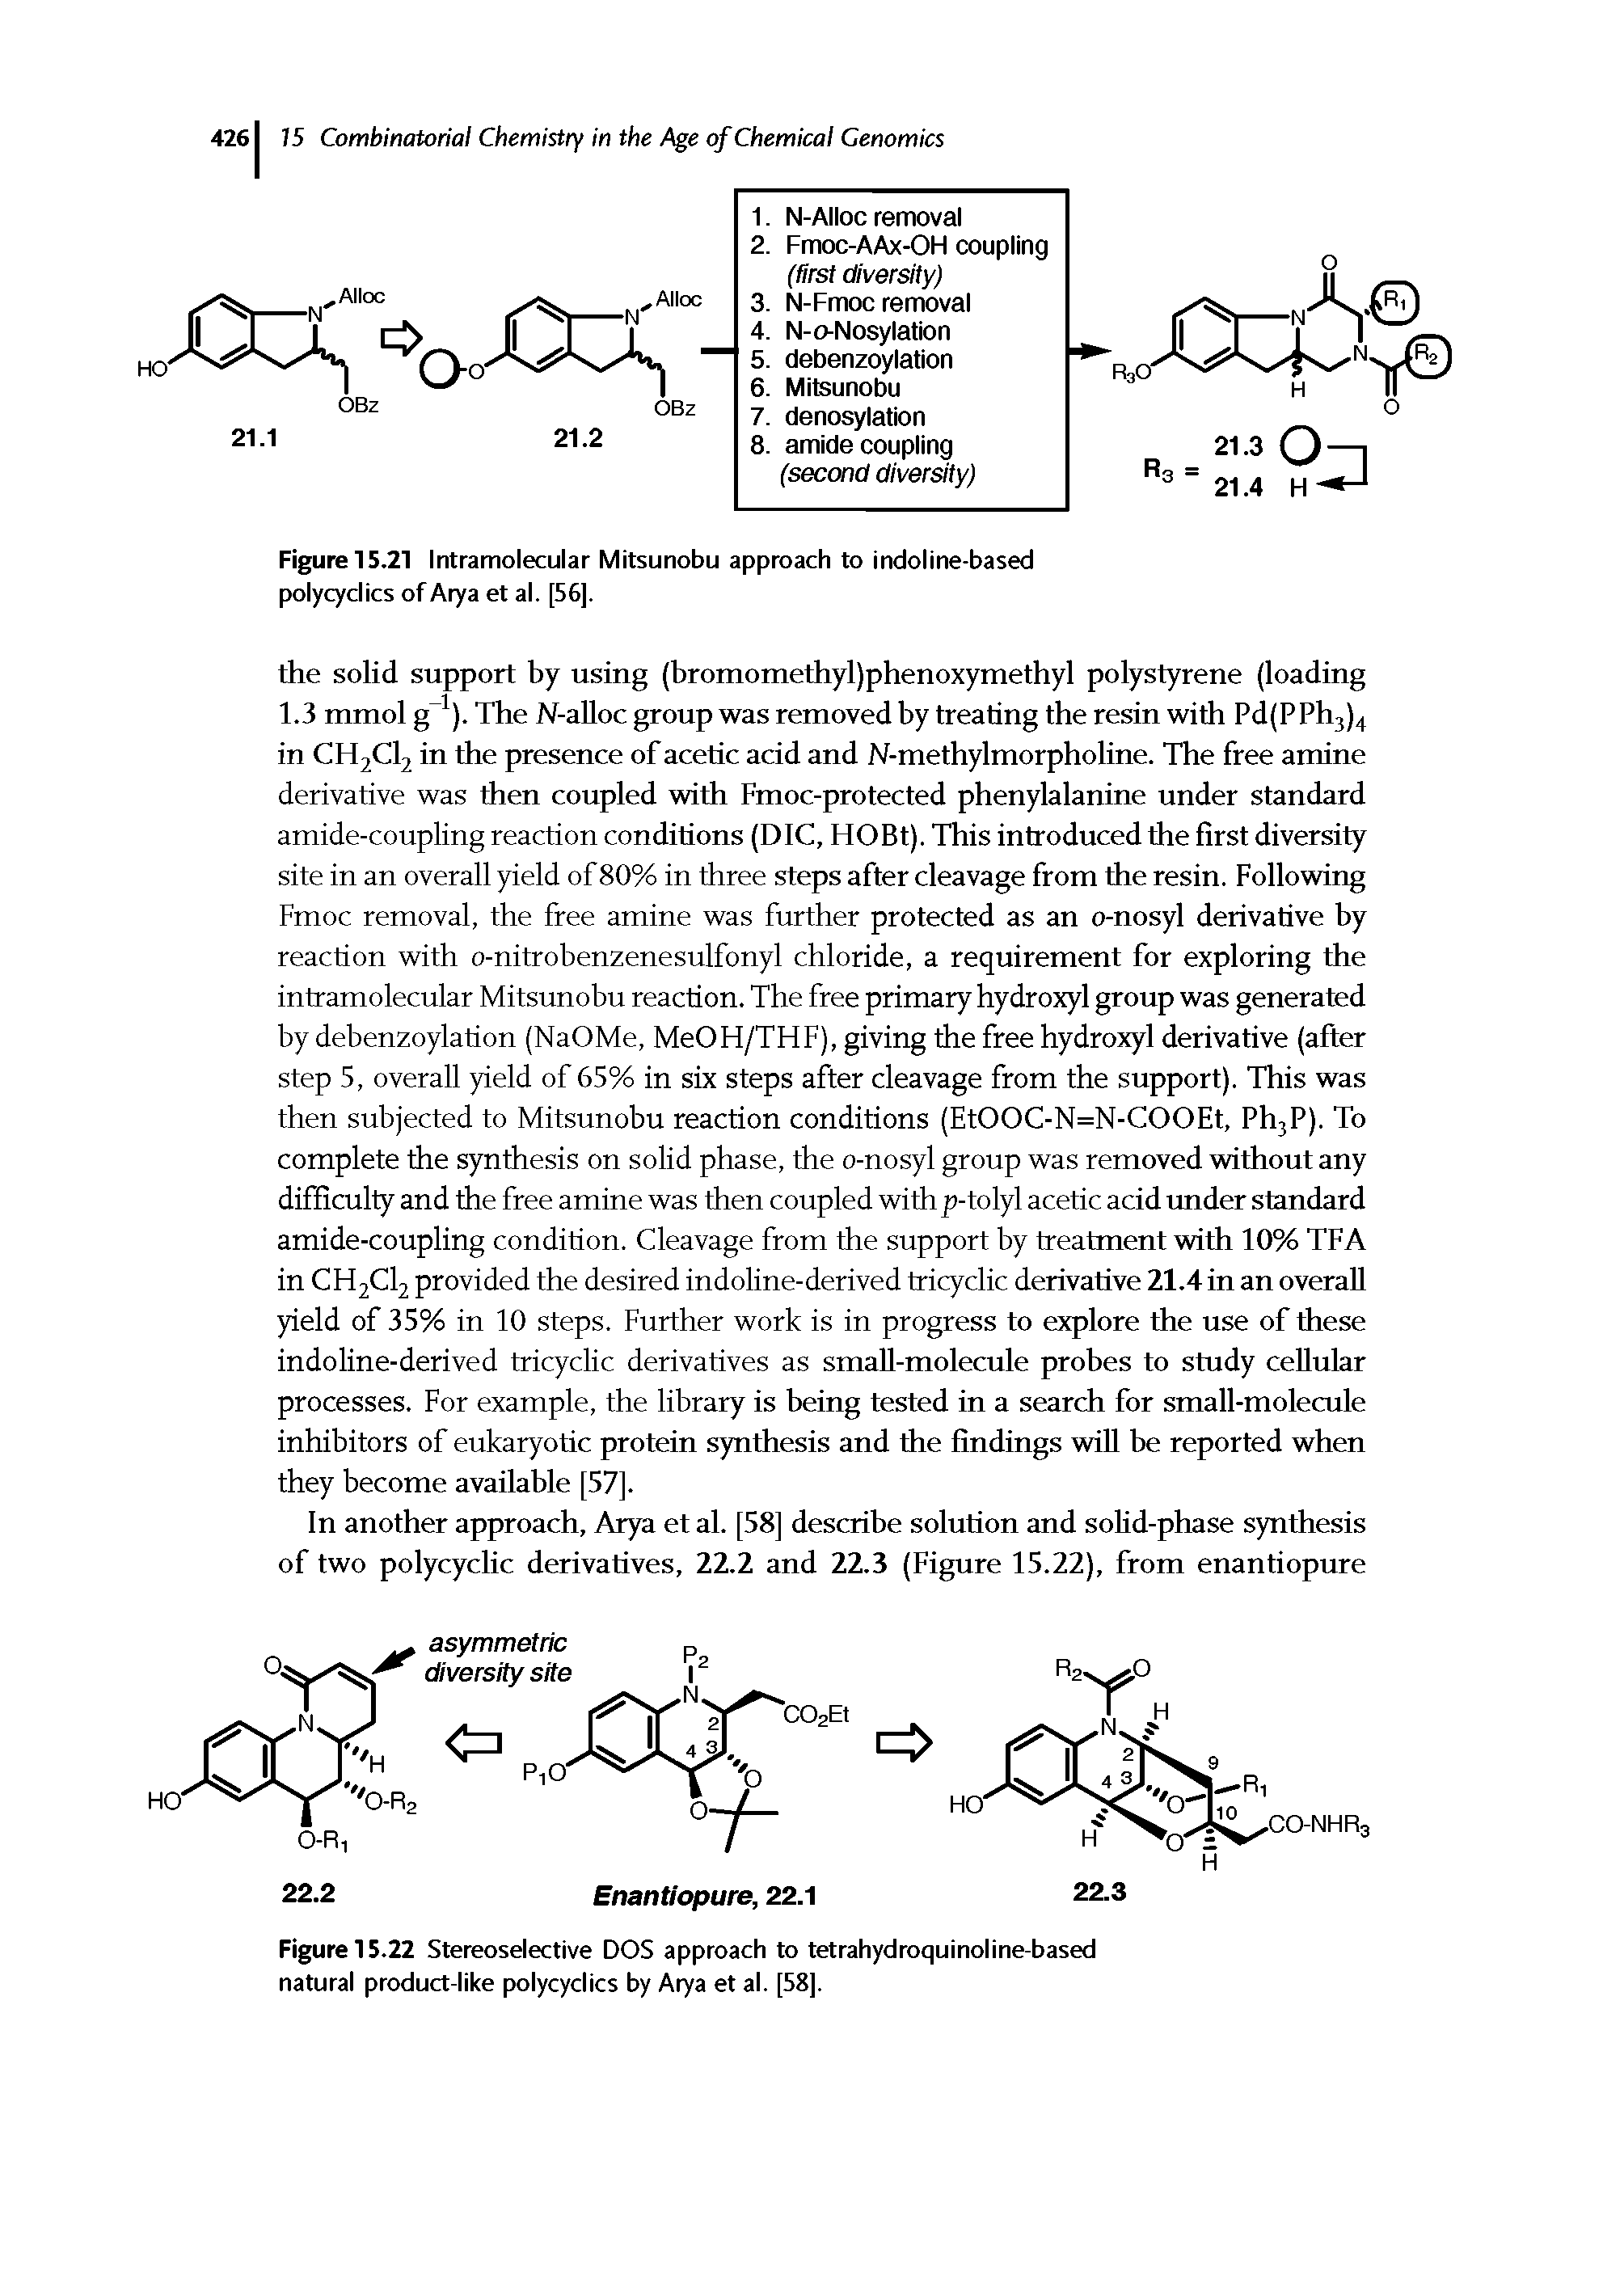 Figure 15.22 Stereoselective DOS approach to tetrahydroquinoline-based natural product-like polycydics by Arya et al. [58].